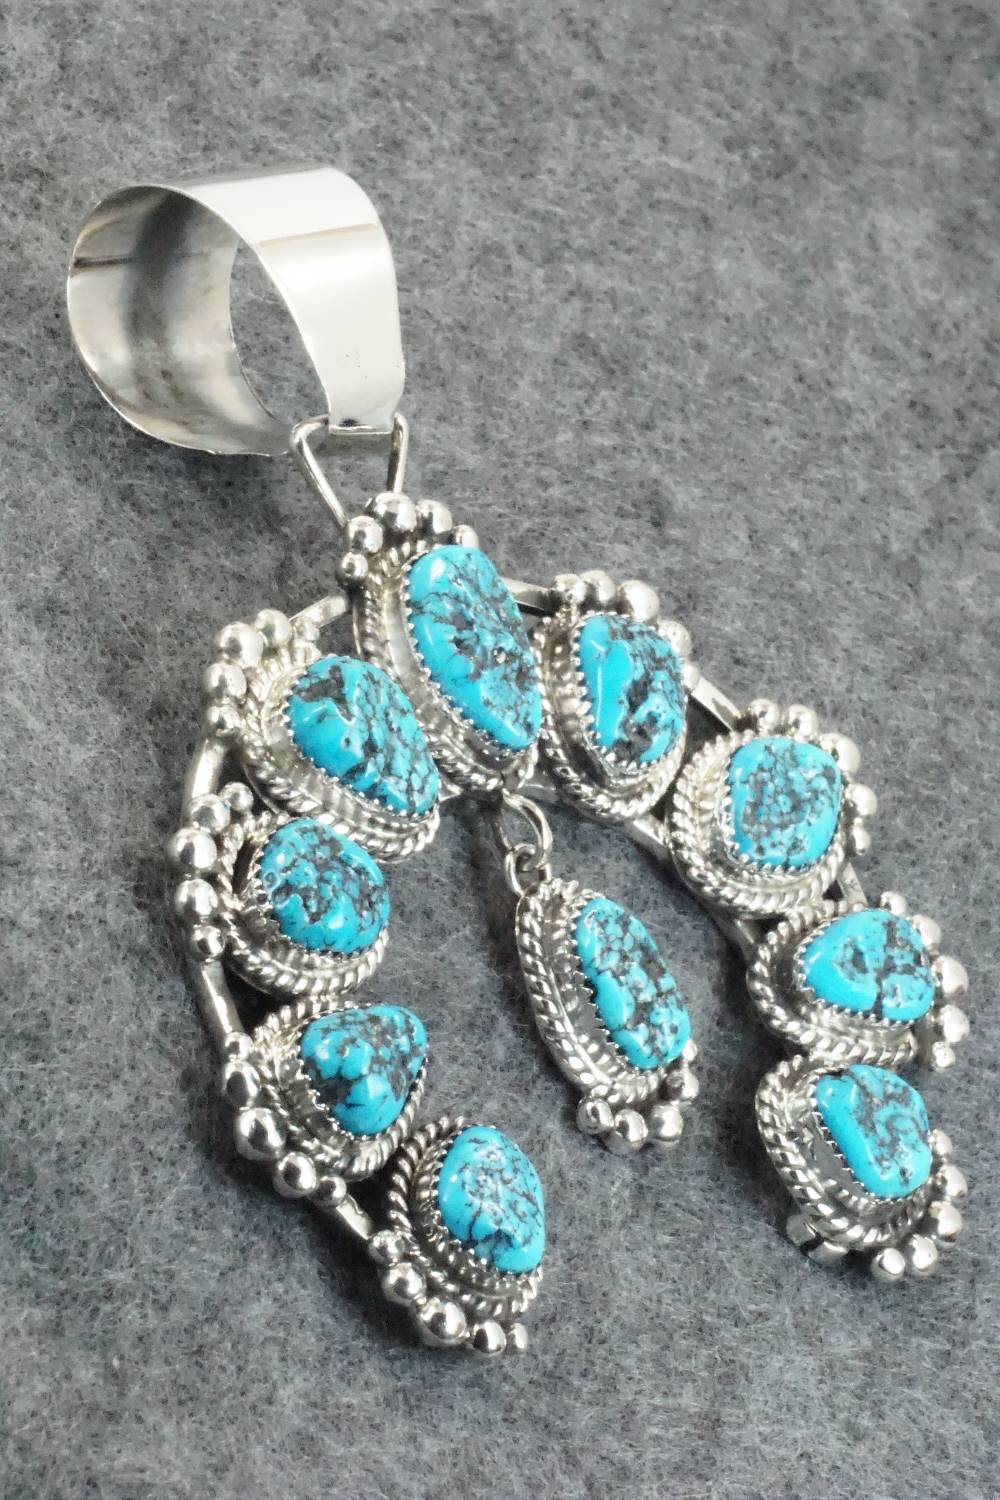 Turquoise and Sterling Silver Naja Pendant - Vernon Johnson